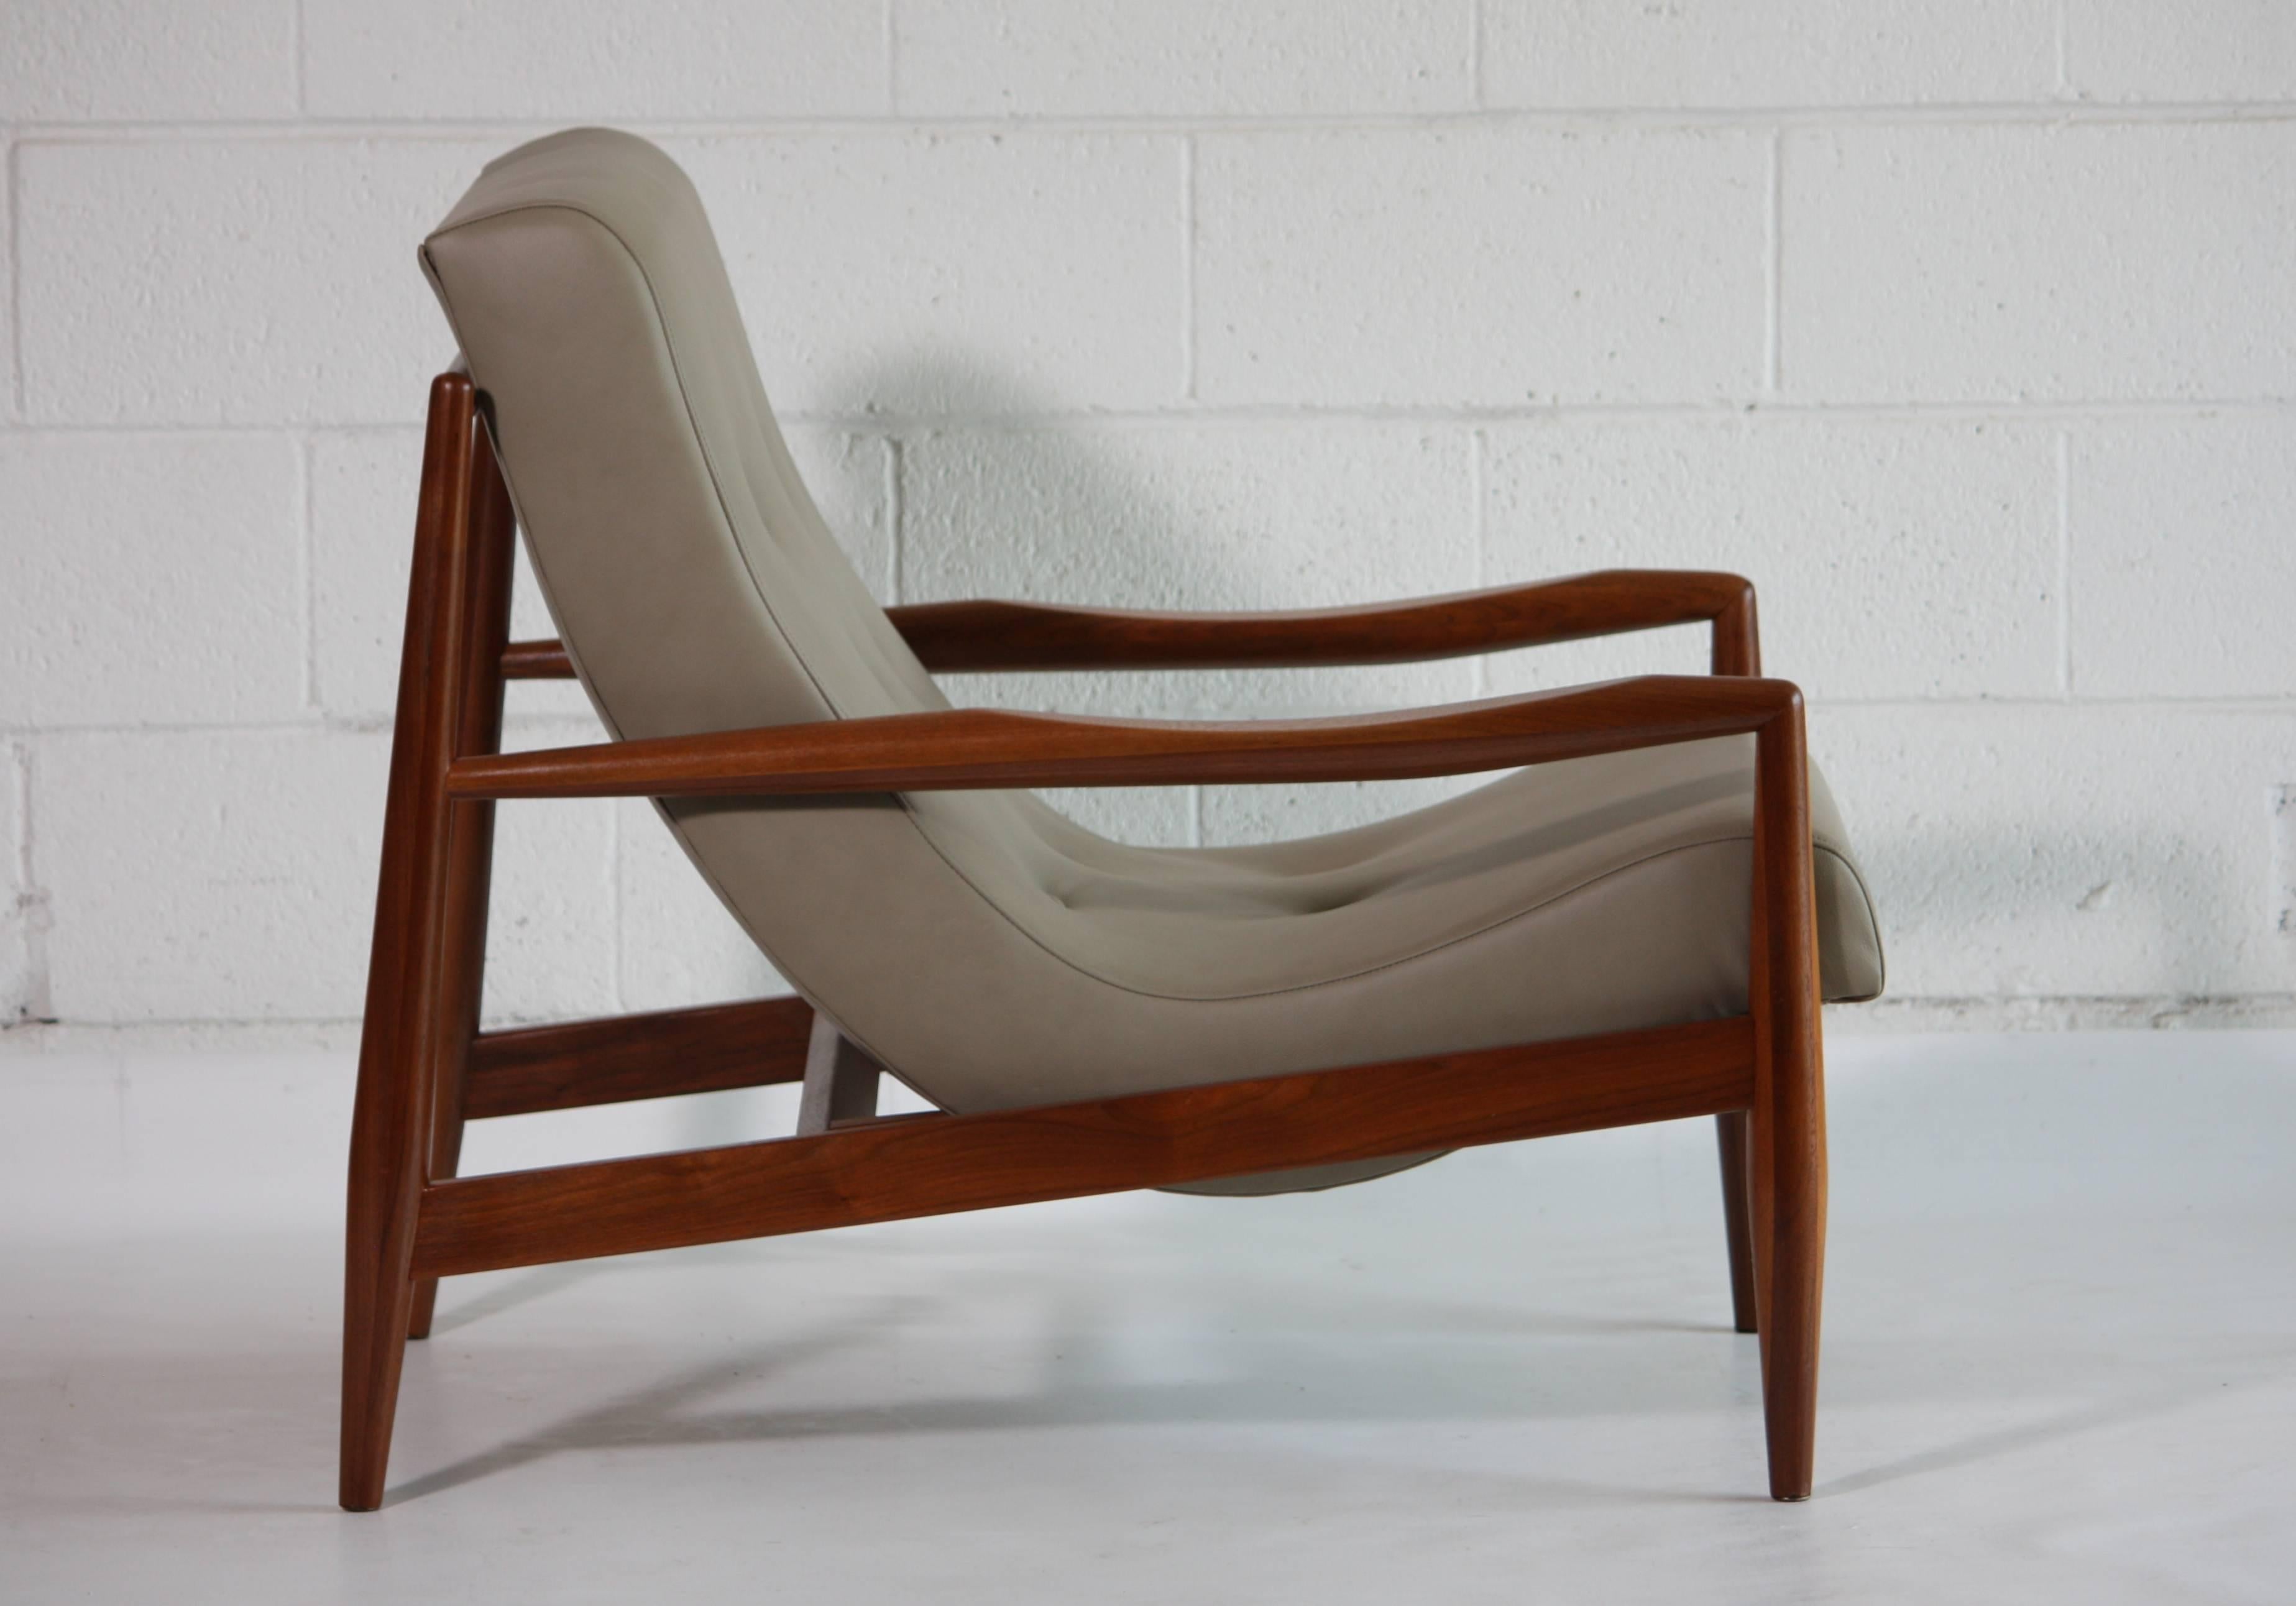 American Lounge Chair by Adrian Pearsall for Craft Associates Inc.